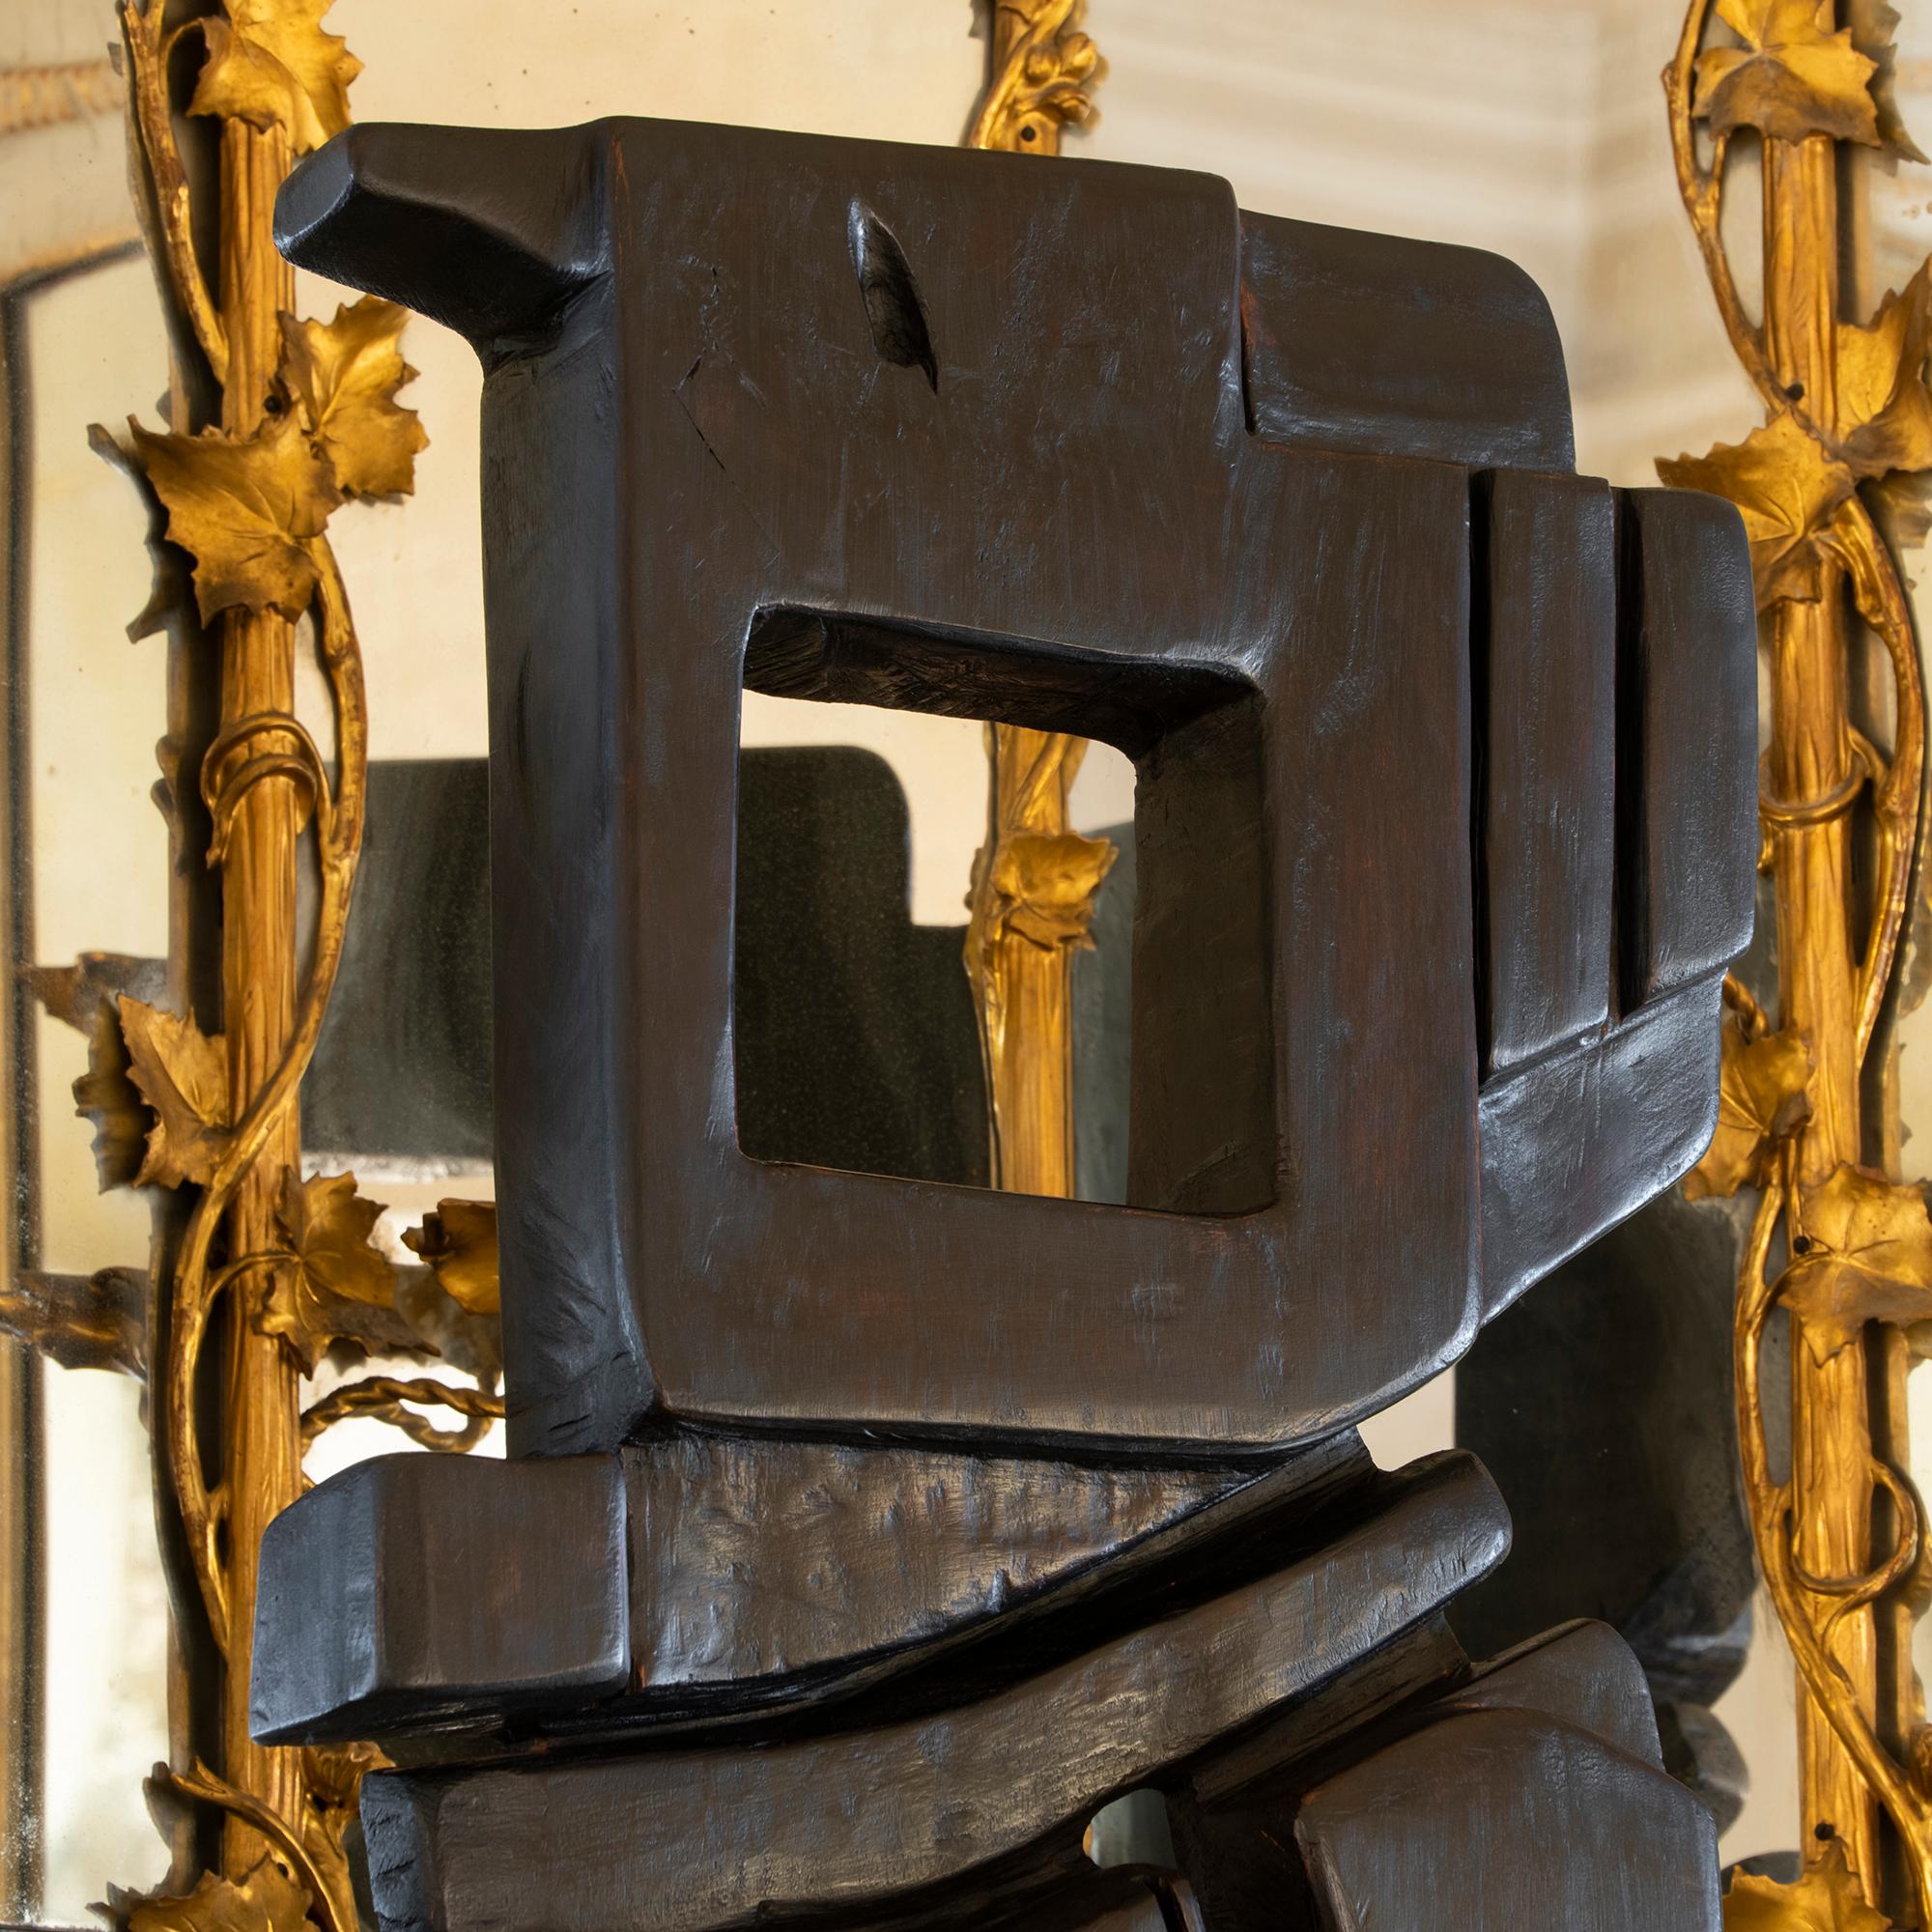 Carved wood abstract sculpture in fine vintage condition with natural cheques in the wood and minor signs of age appropriate wear, France circa 1960.